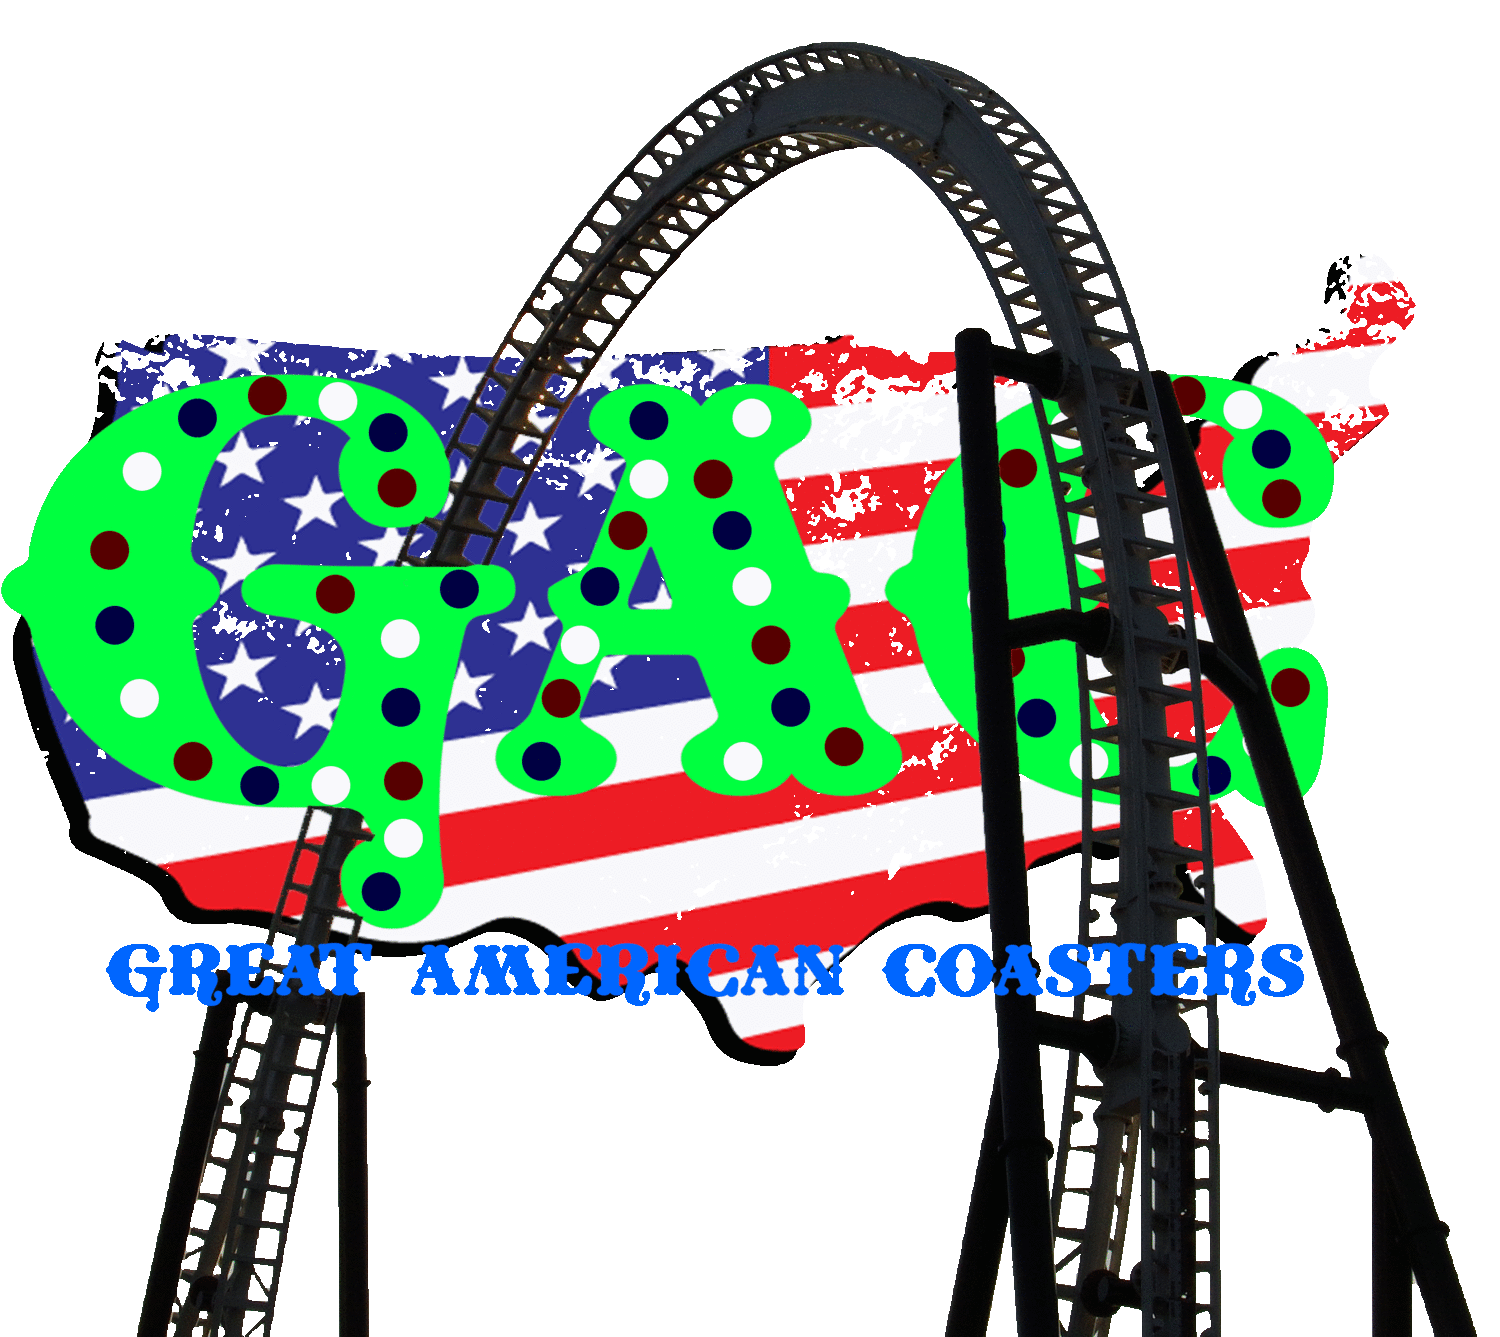 rollercoaster clipart theme park